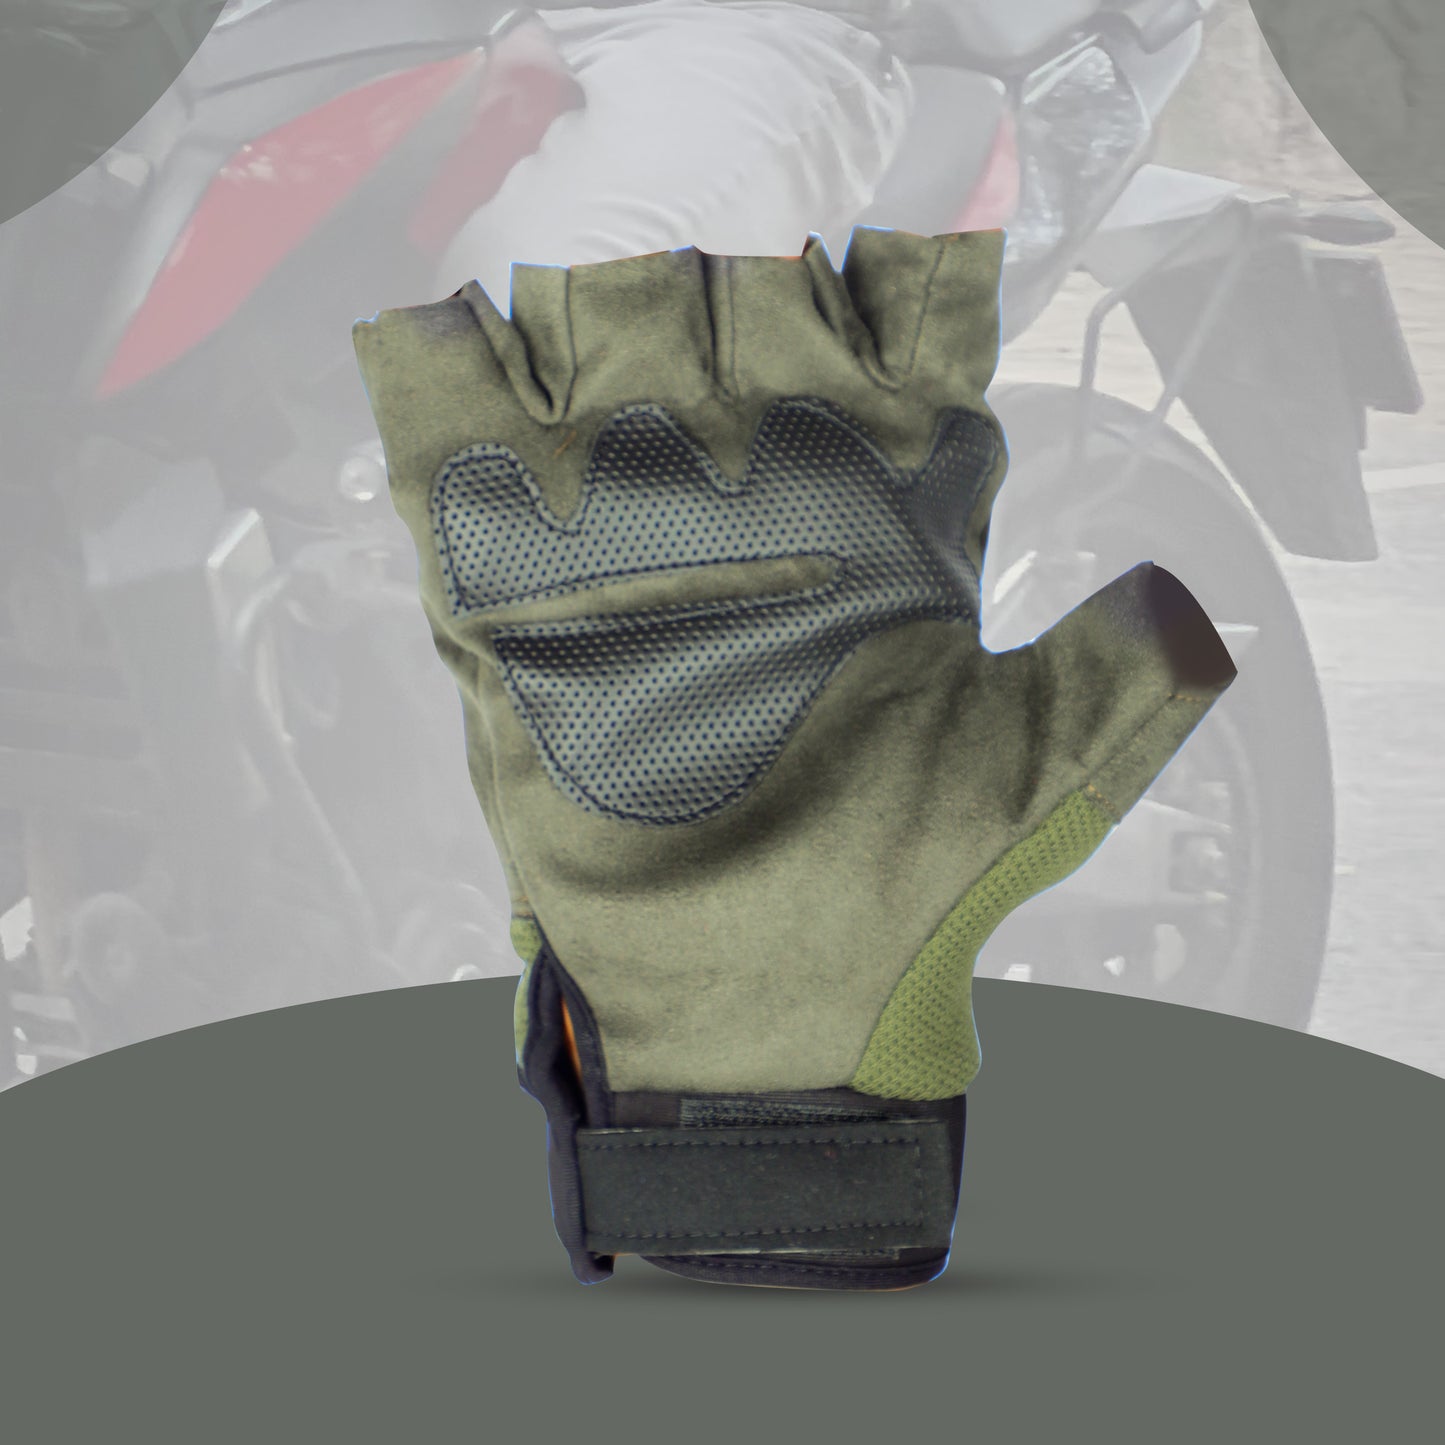 Steelbird Experience 1.0 Reflective Half Finger Bike Riding Gloves, Protective Off-Road Motorbike Racing (Green)